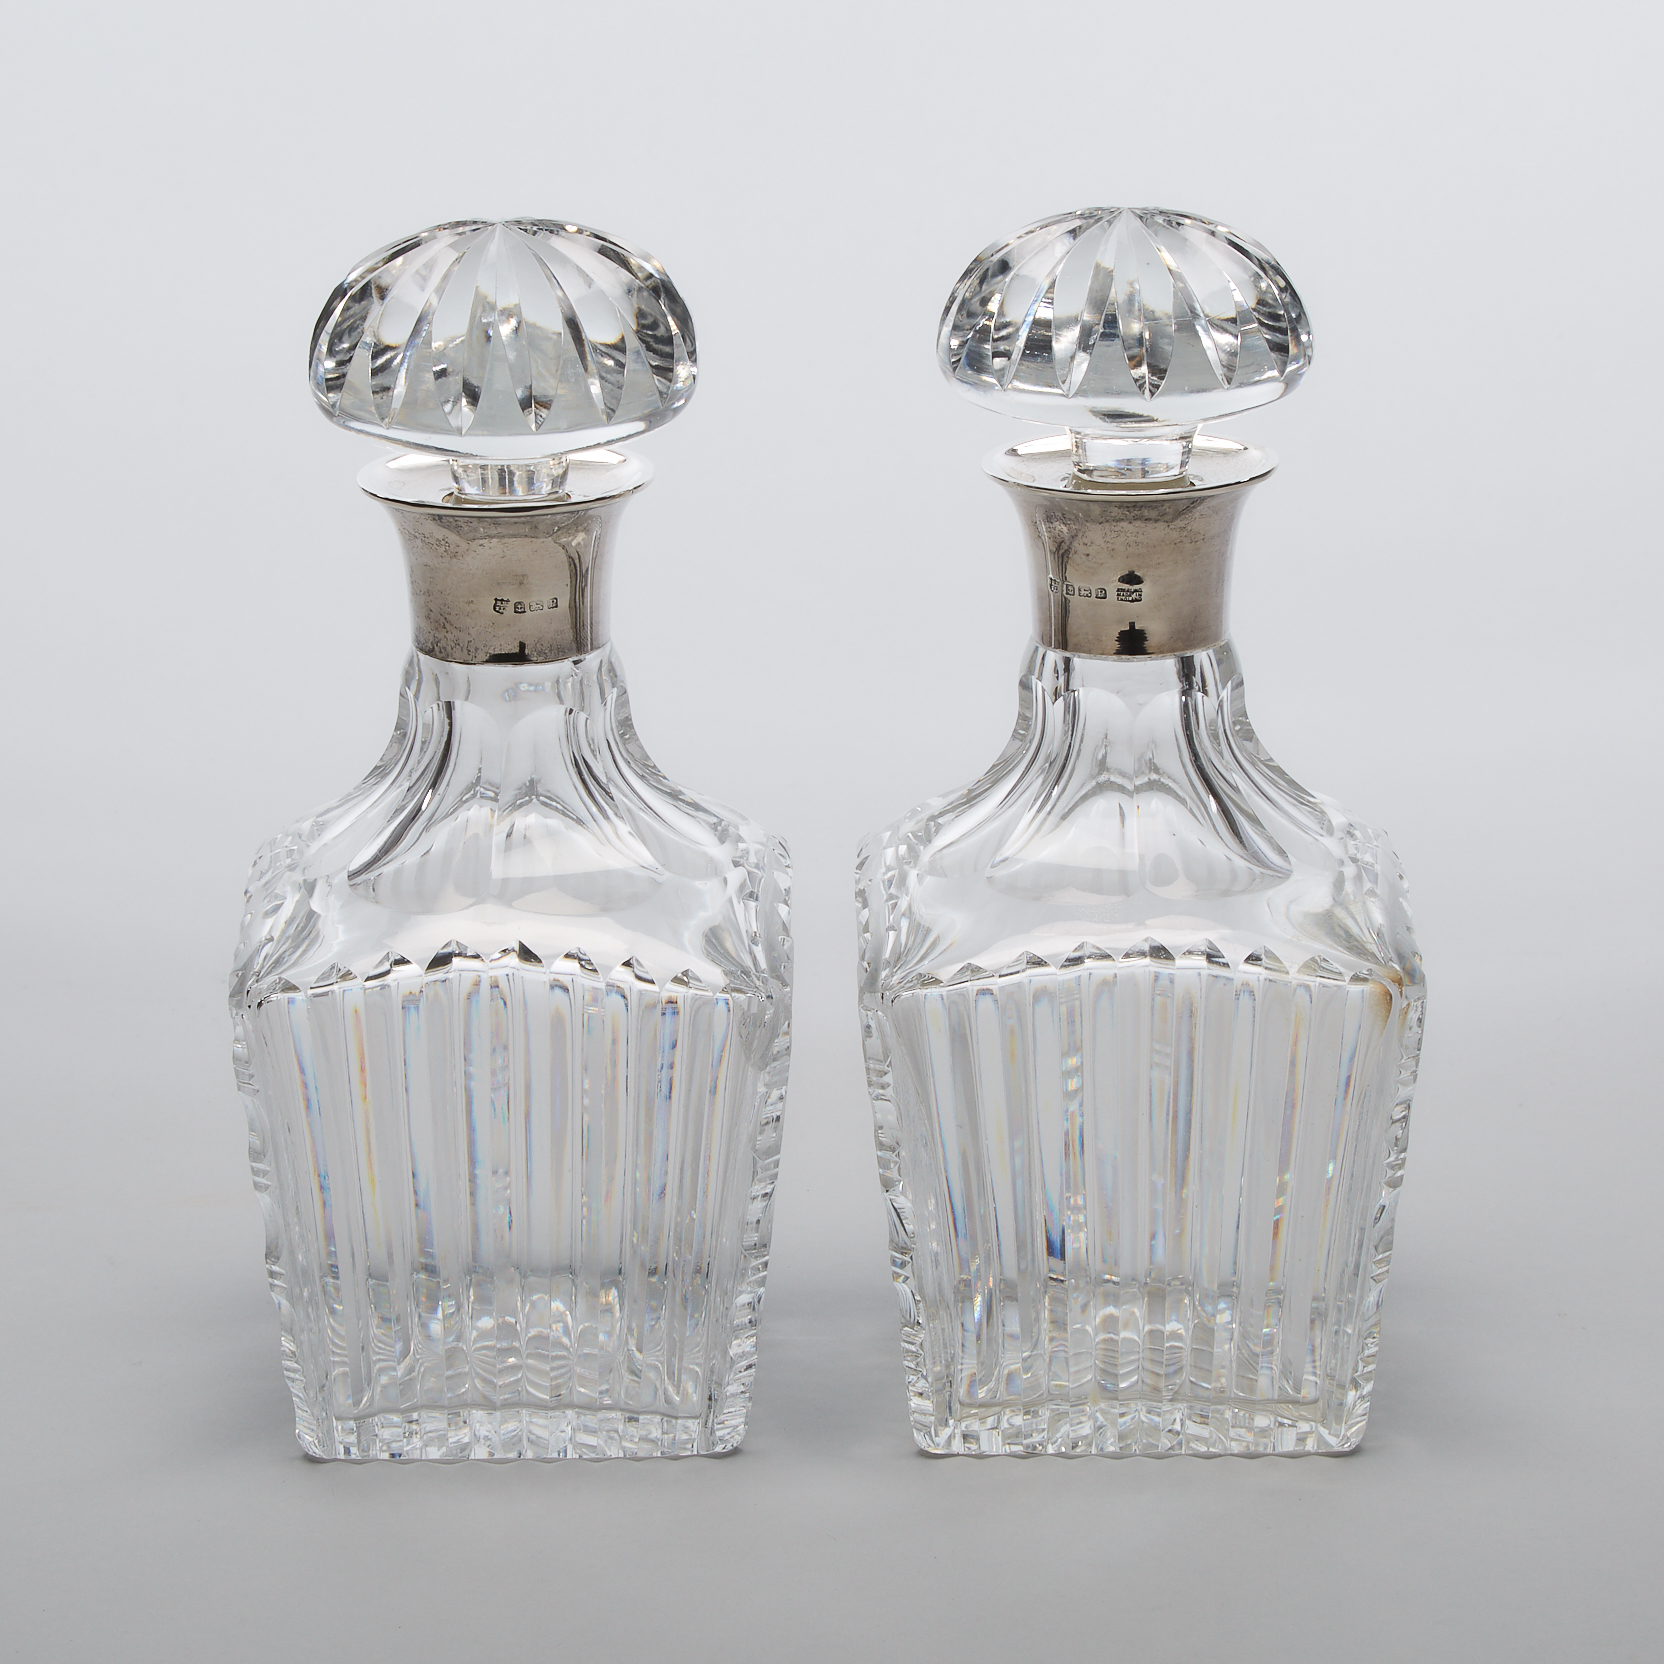 Pair of English Silver Mounted Cut Glass Decanters, Barker Brothers, Birmingham, 1939